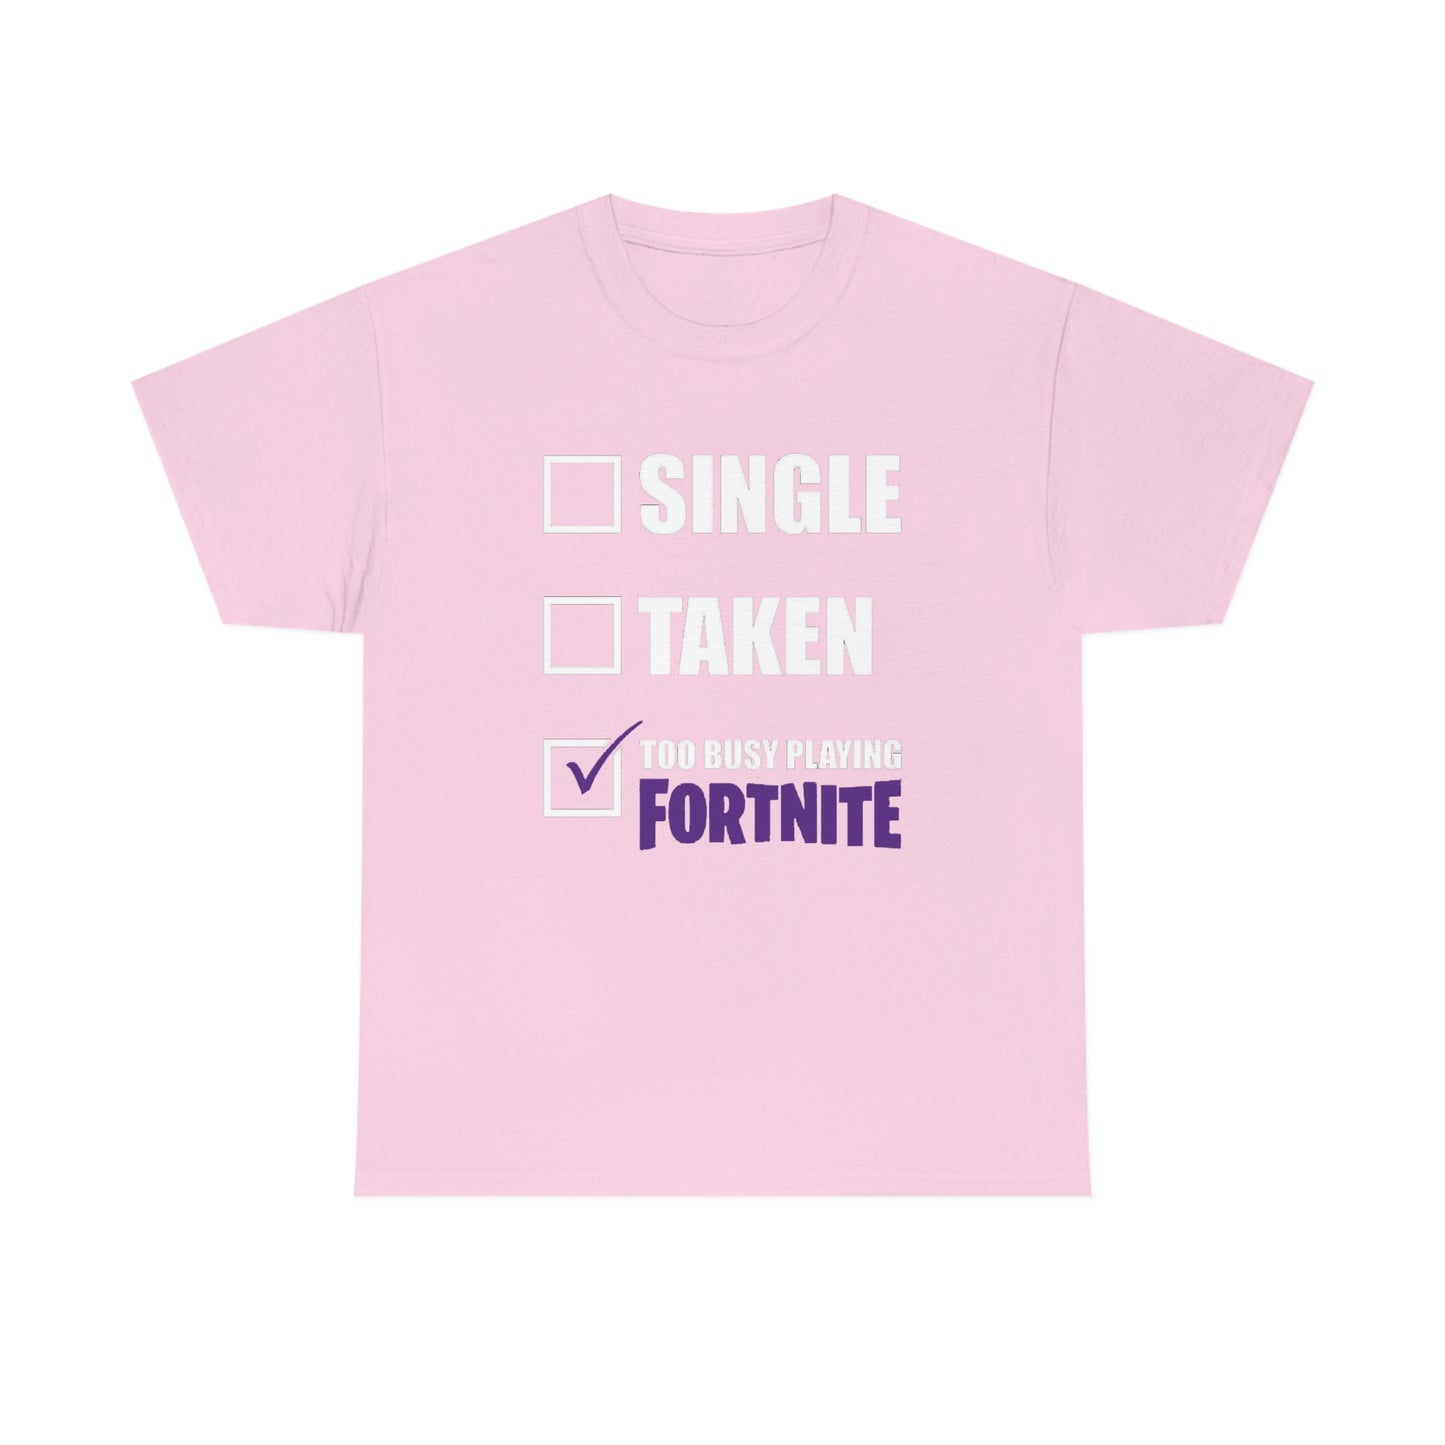 Fortnite Before Hoes 😎